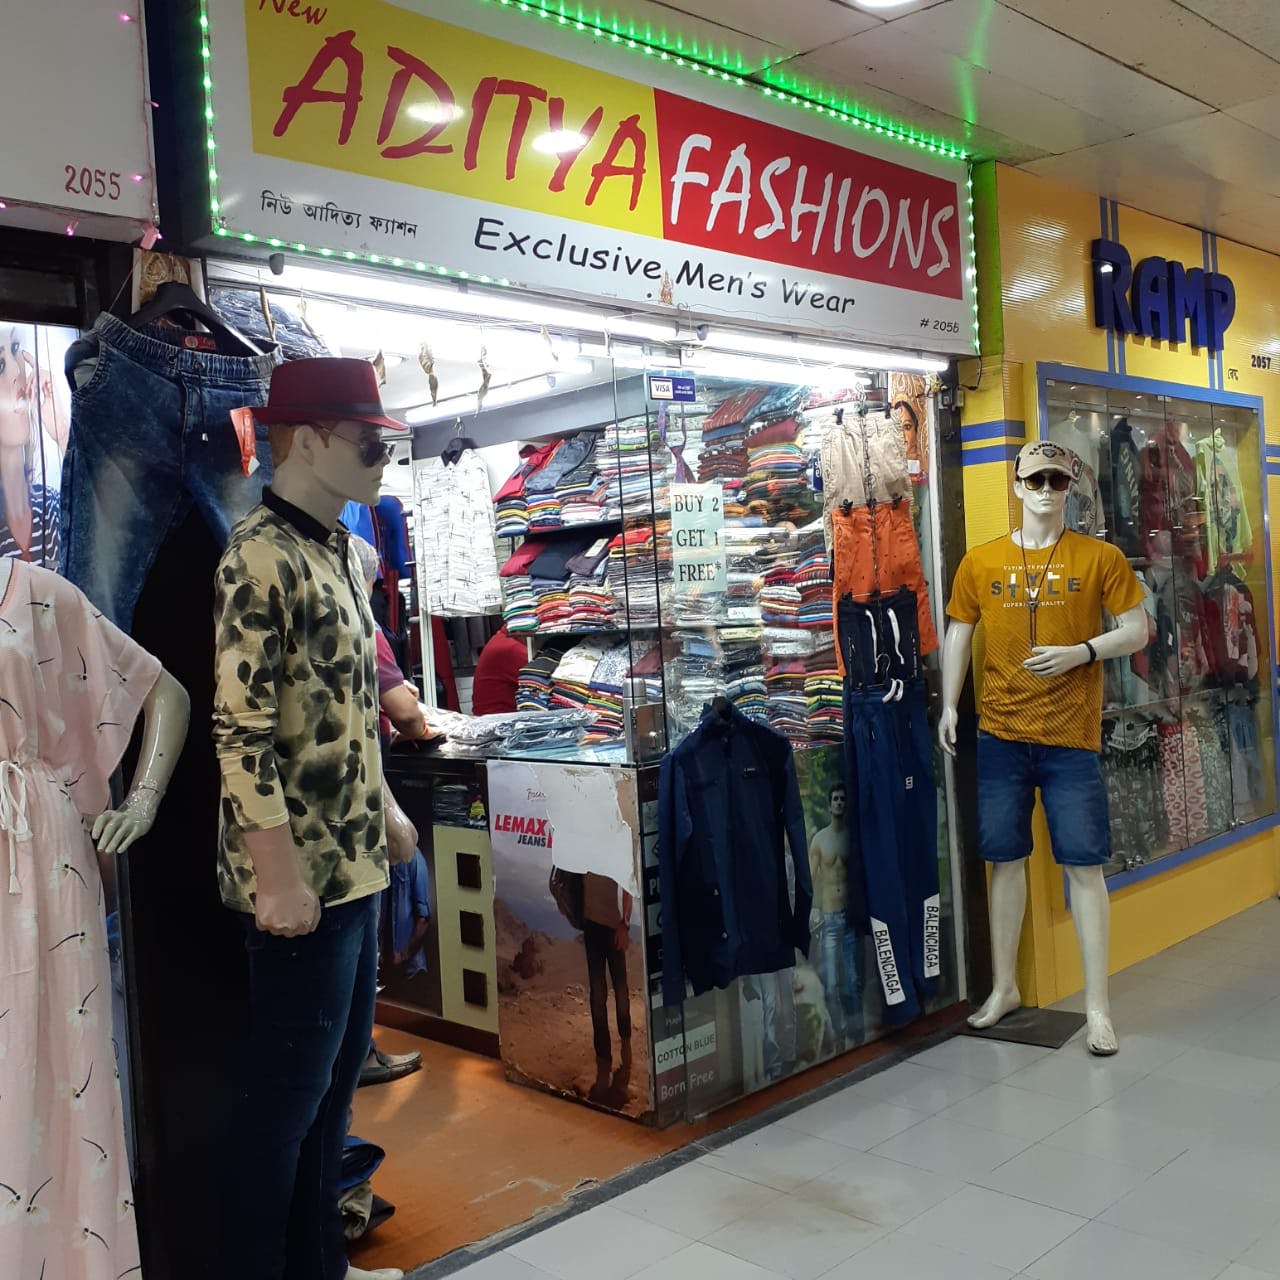 Retail,Outlet store,Shopping,Building,Customer,Trade,Bazaar,Selling,Shopping mall